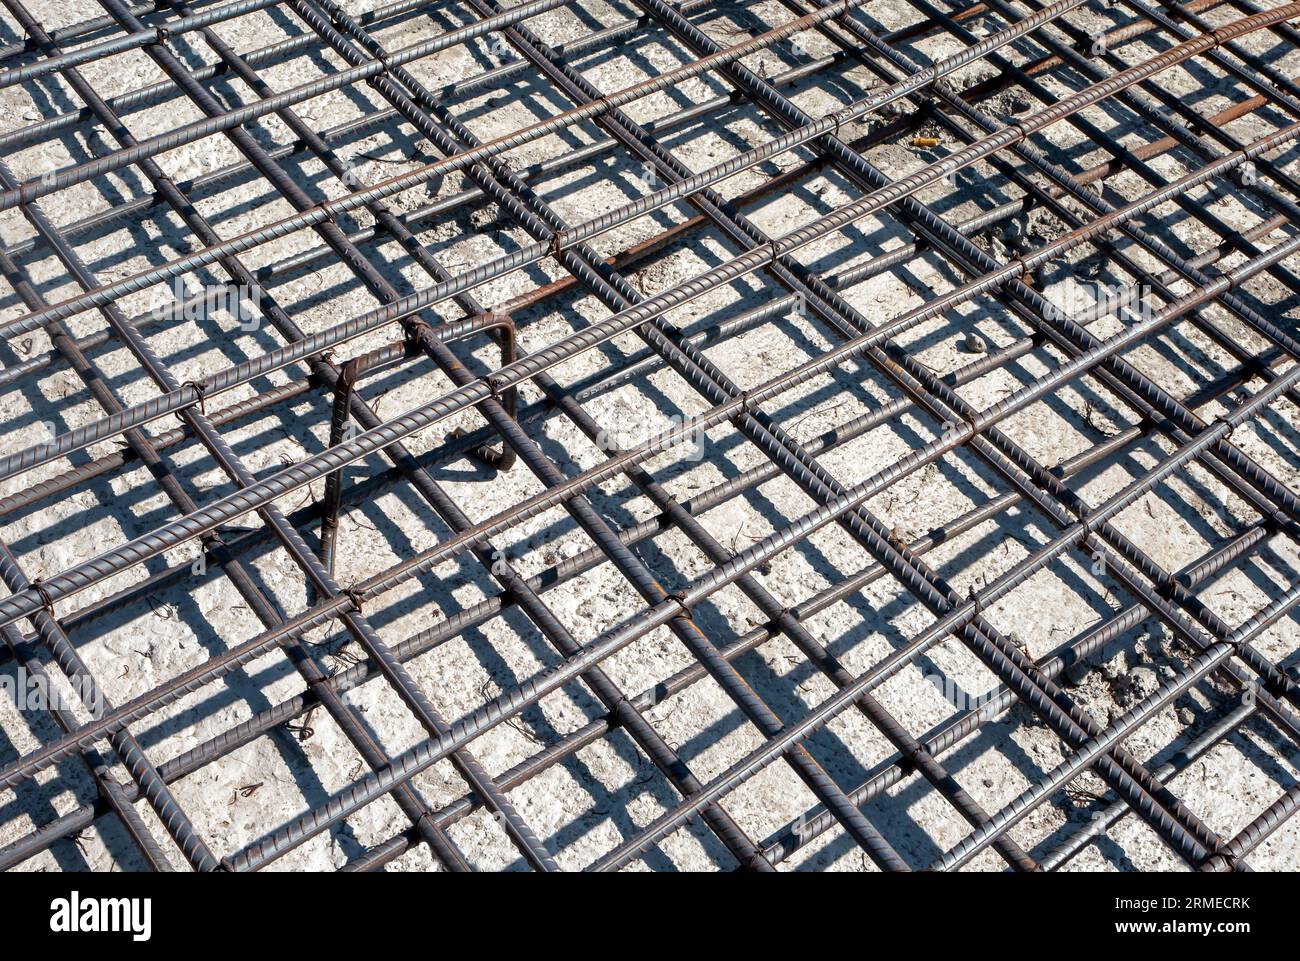 Iron reinforcement bars for construction for cement casting preparation. Stock Photo